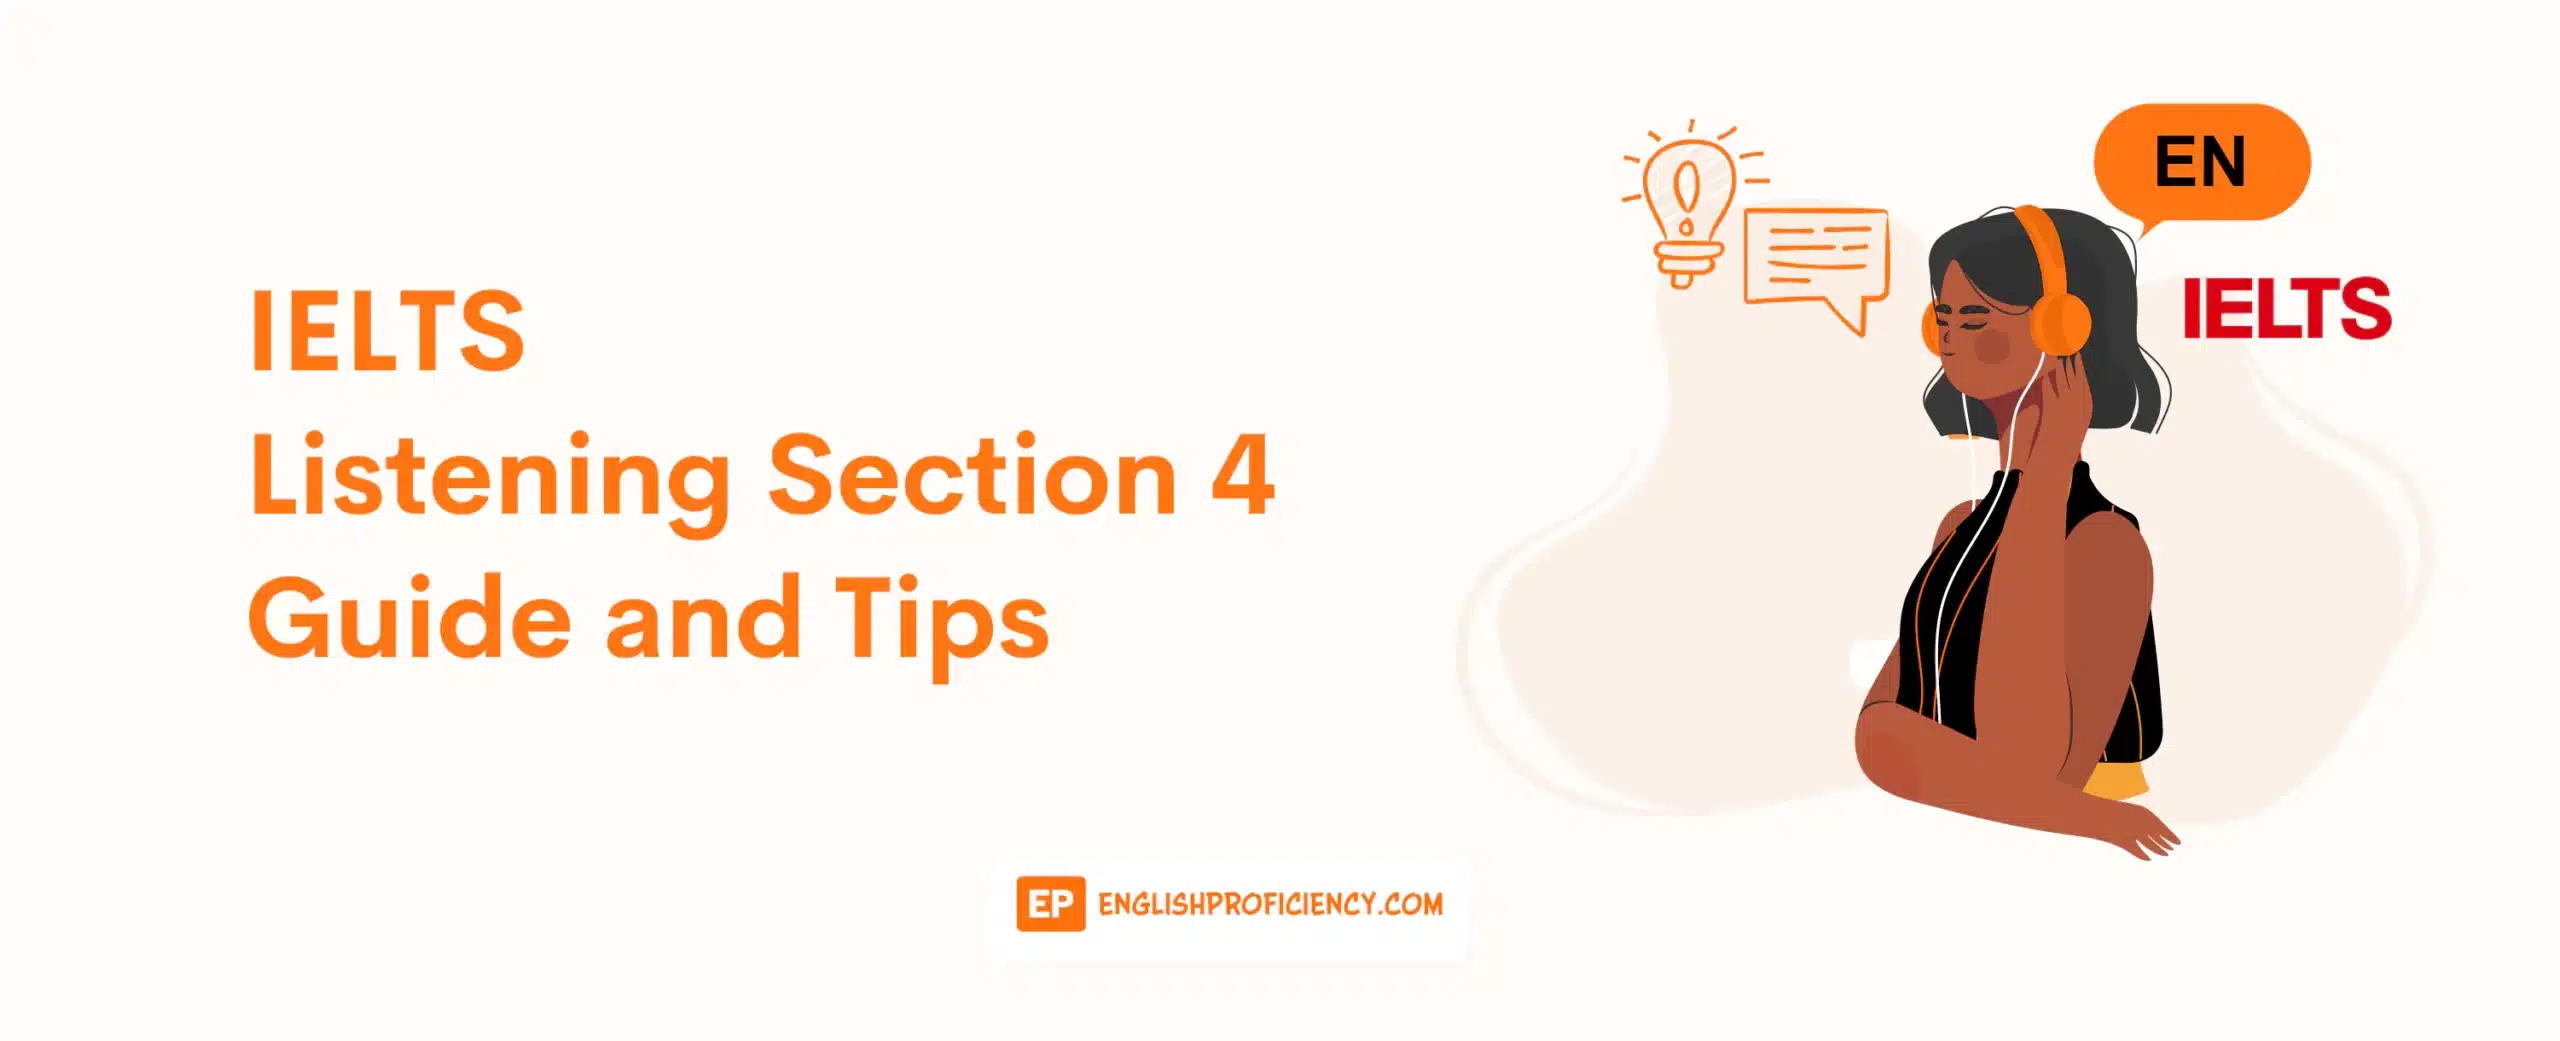 IELTS Listening Section 4 Guide and Tips